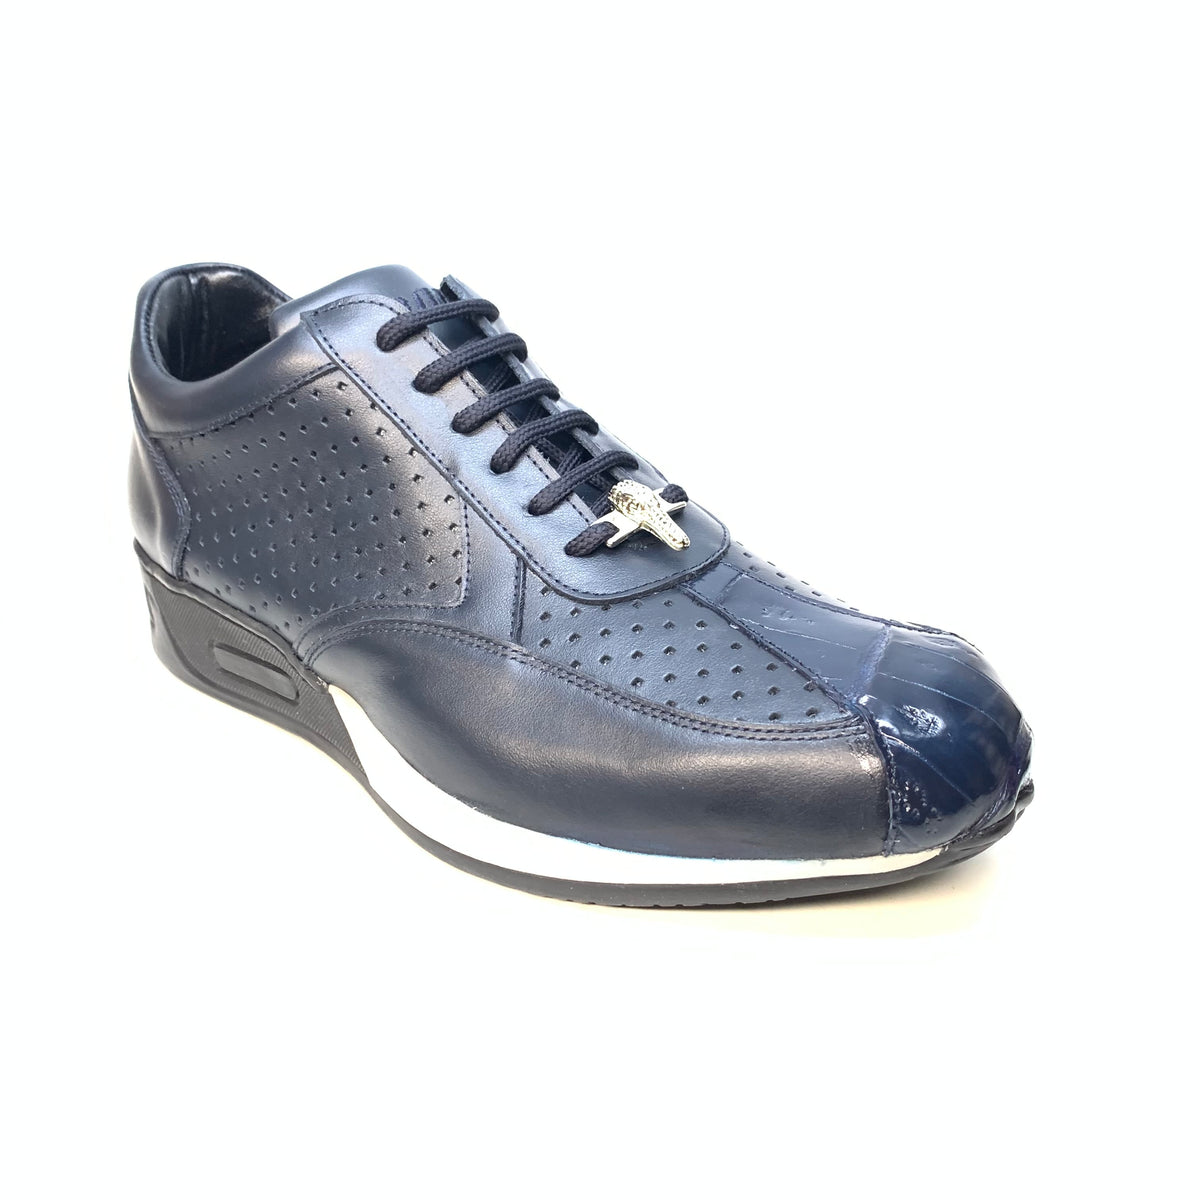 Mauri M770 Navy Crocodile Perforated Nappa Leather Sneakers - Dudes Boutique